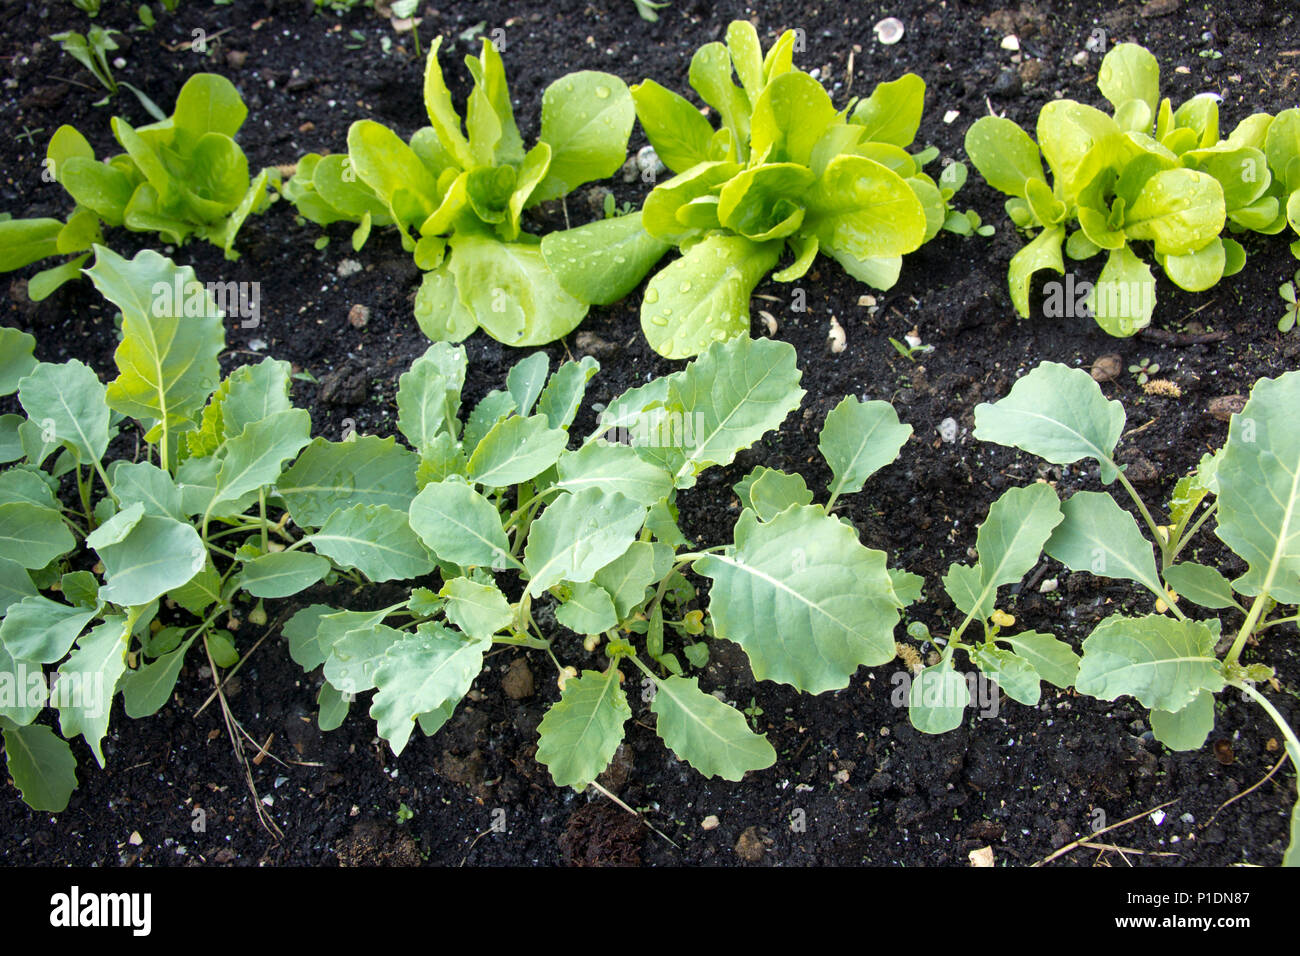 Young plants in a vegetable garden Stock Photo